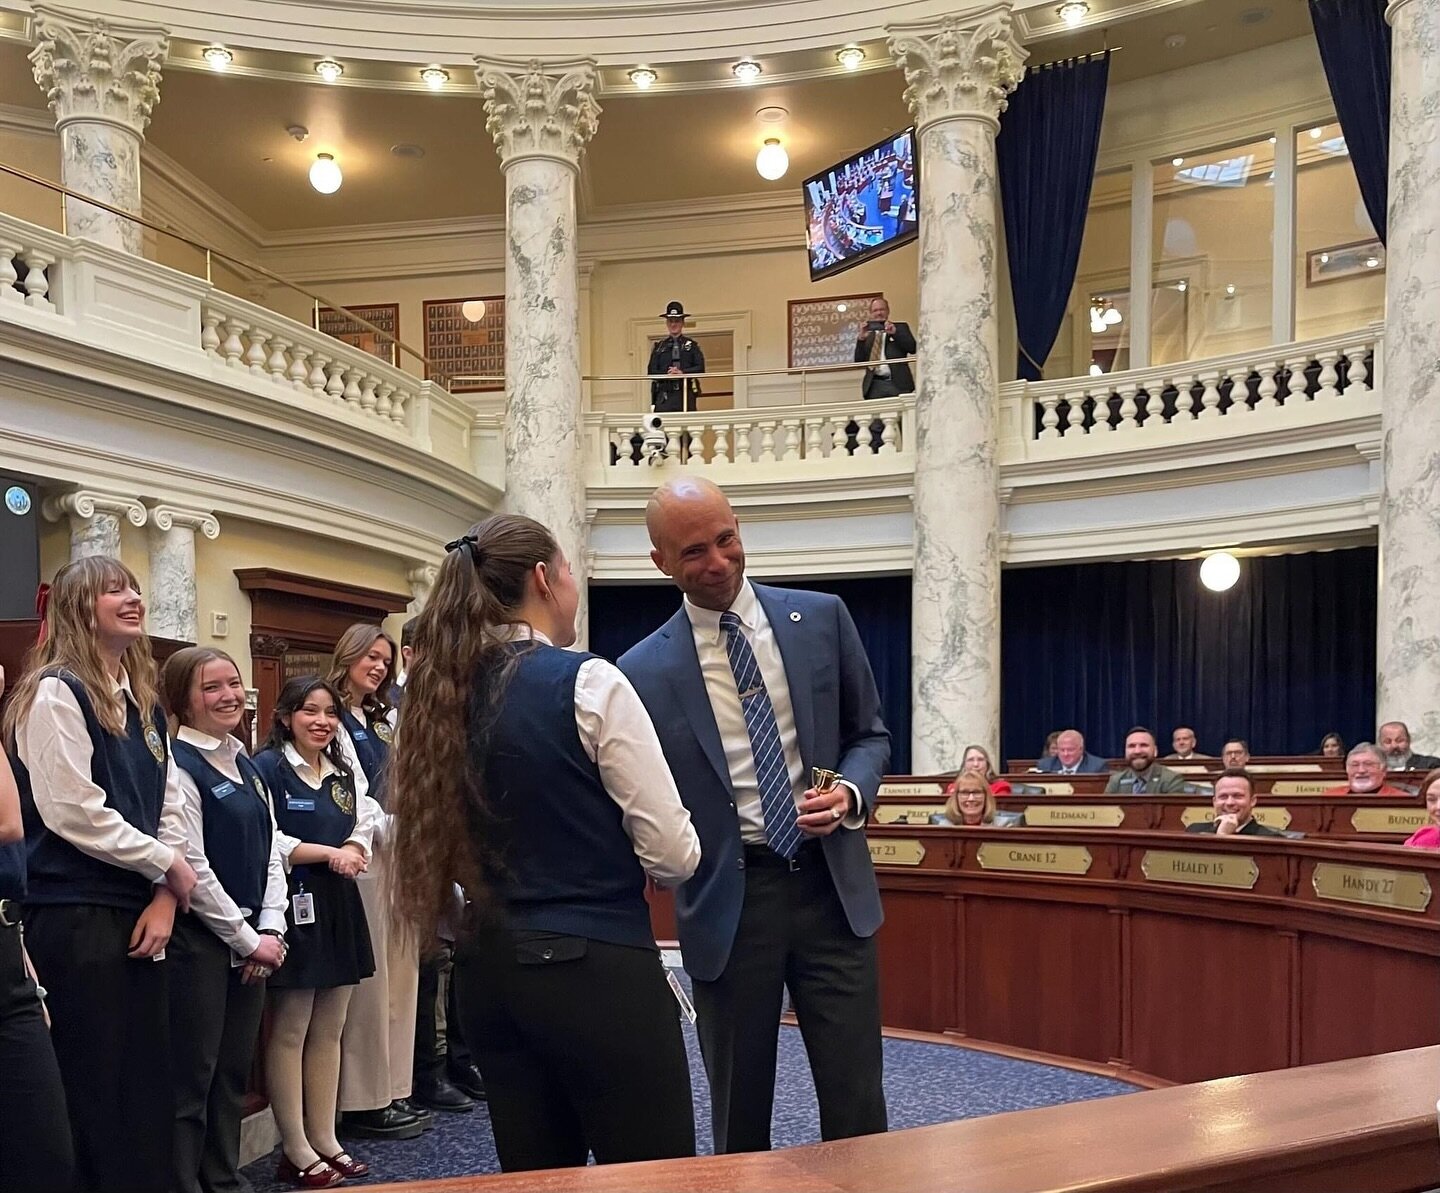 Yesterday, I was pleased to accept the prestigious House Page Award for &ldquo;Best Hair.&rdquo;

Our pages help keep the show rolling down at the Statehouse, and I&rsquo;m so grateful for all that they hair-do.